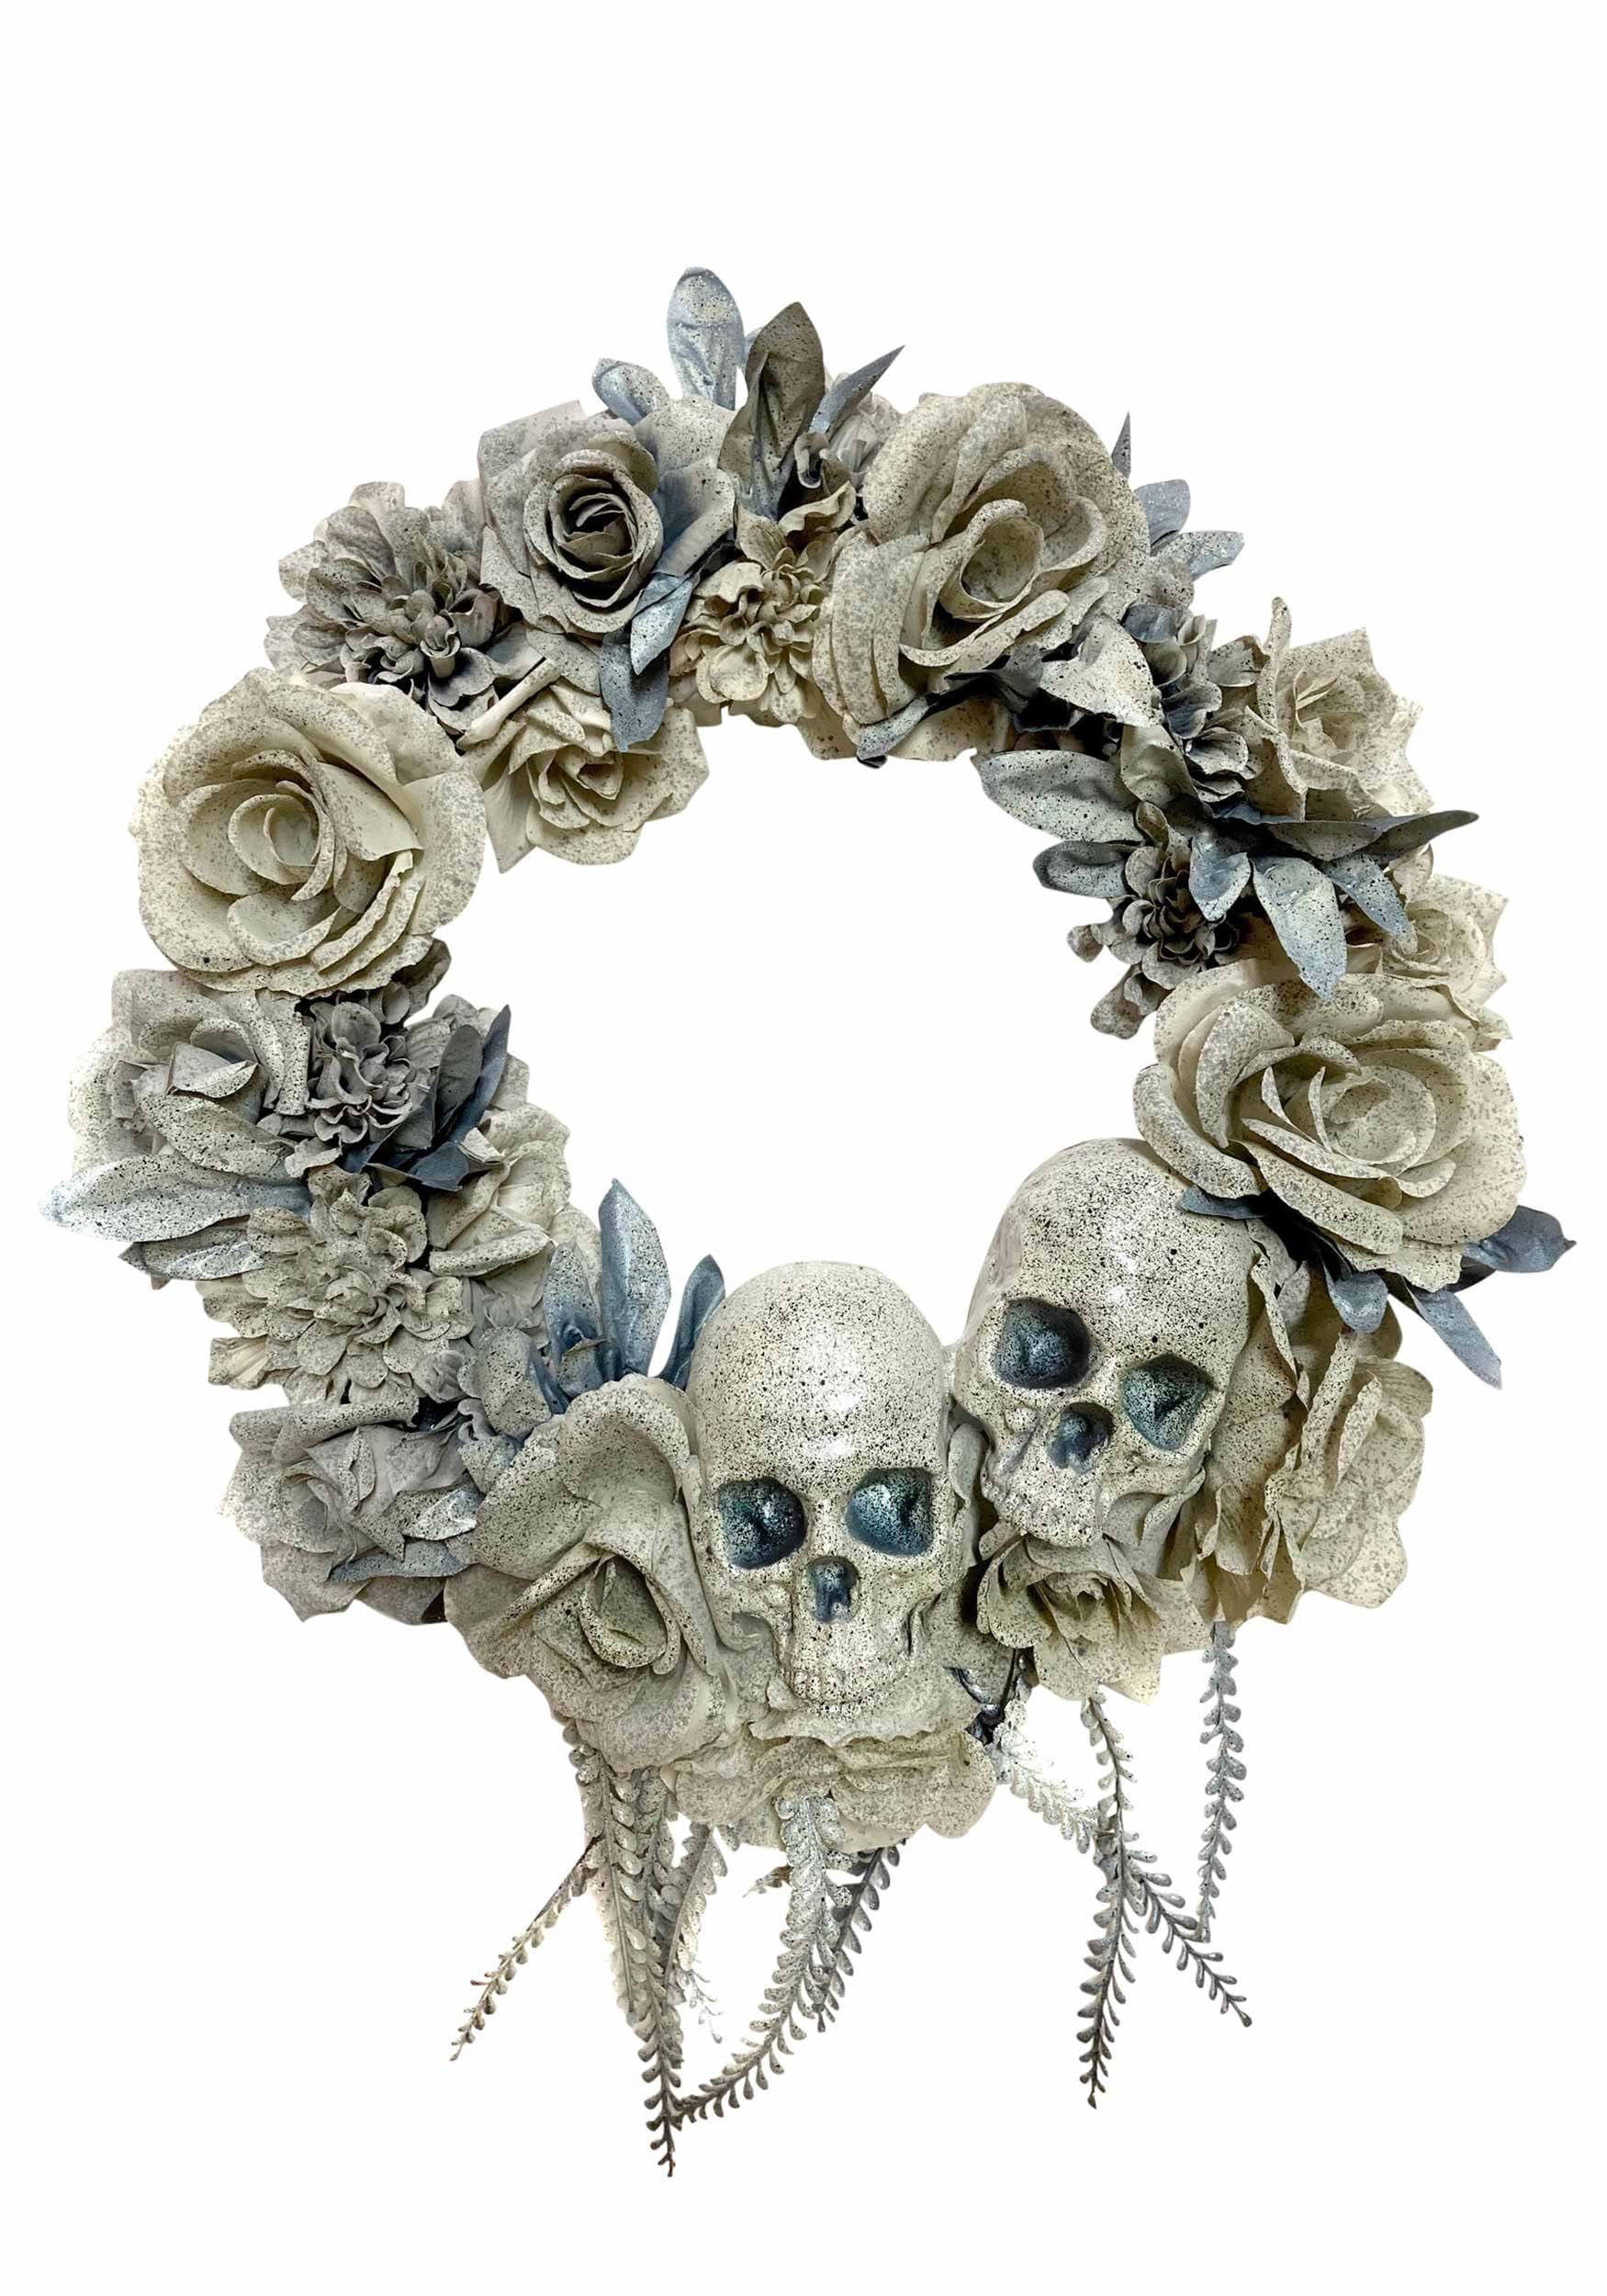 20″ Wreath with Skull & Roses Decoration